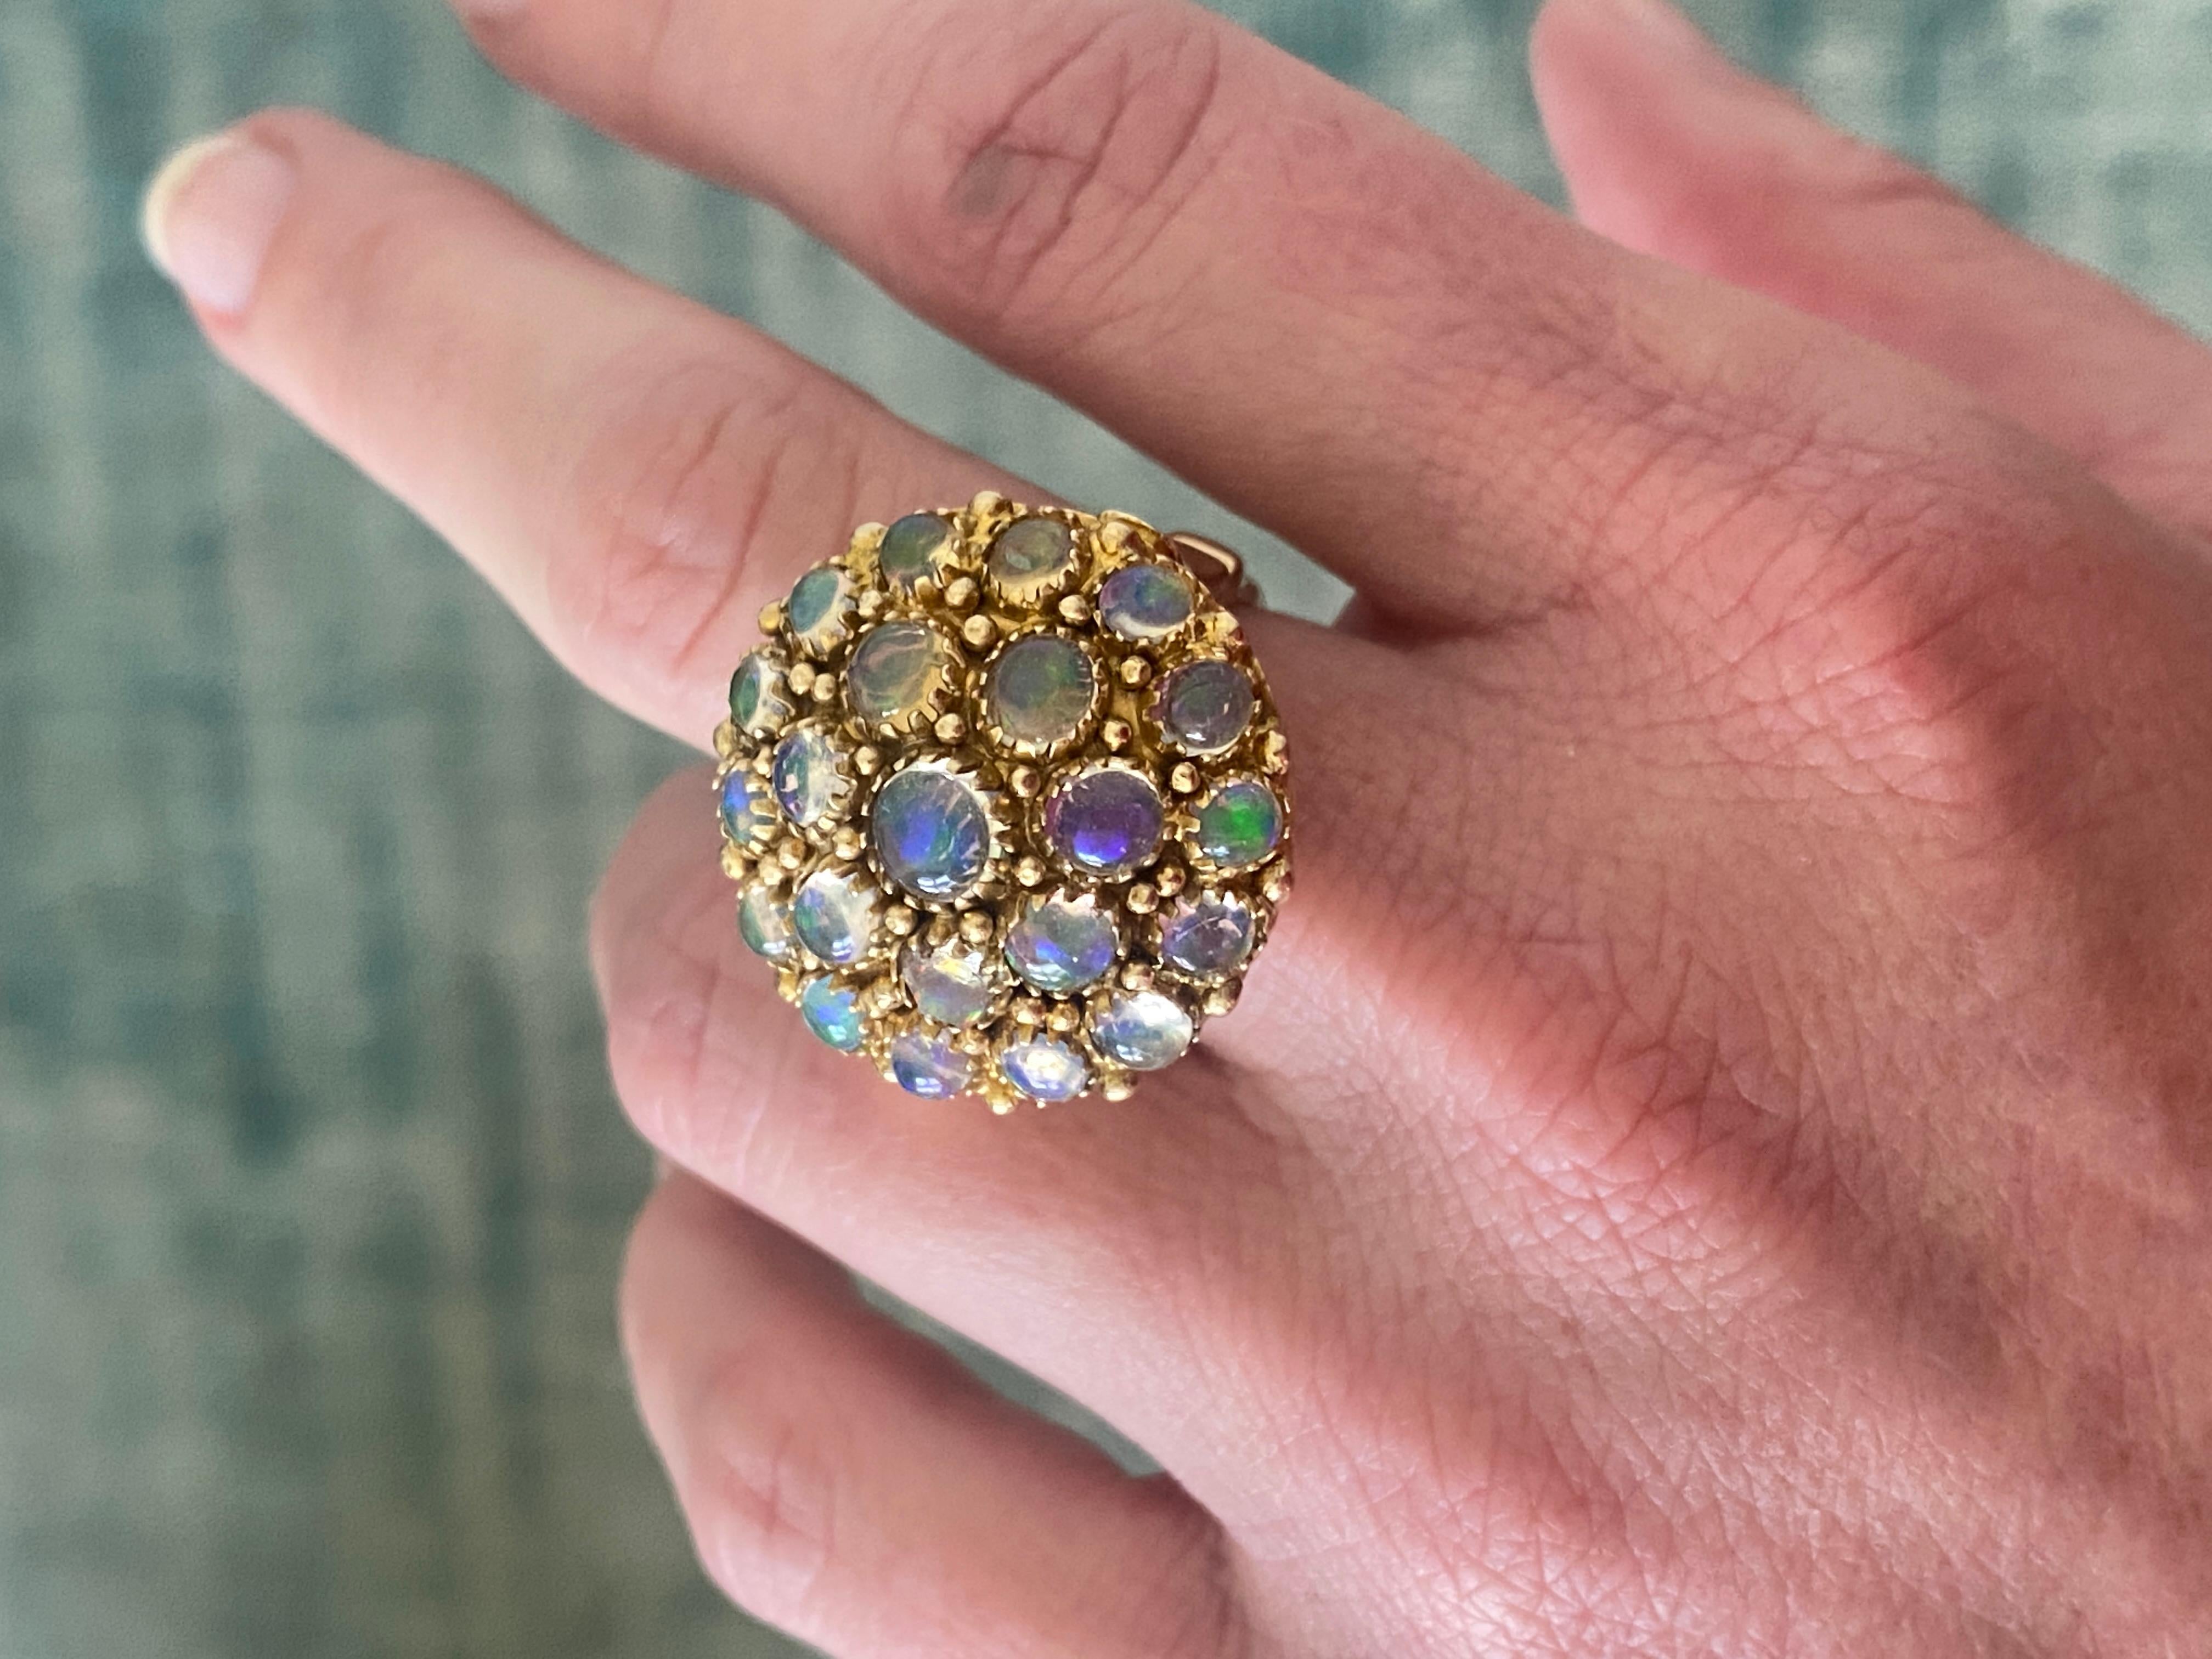 Large Vintage, Domed 14K Yellow Gold Multi-Opal Round Cocktail Statement Ring. Opal stones are round and oval and bezel set throughout ring. Sure to be a stunner day or night.
Free shipping anywhere in the US.